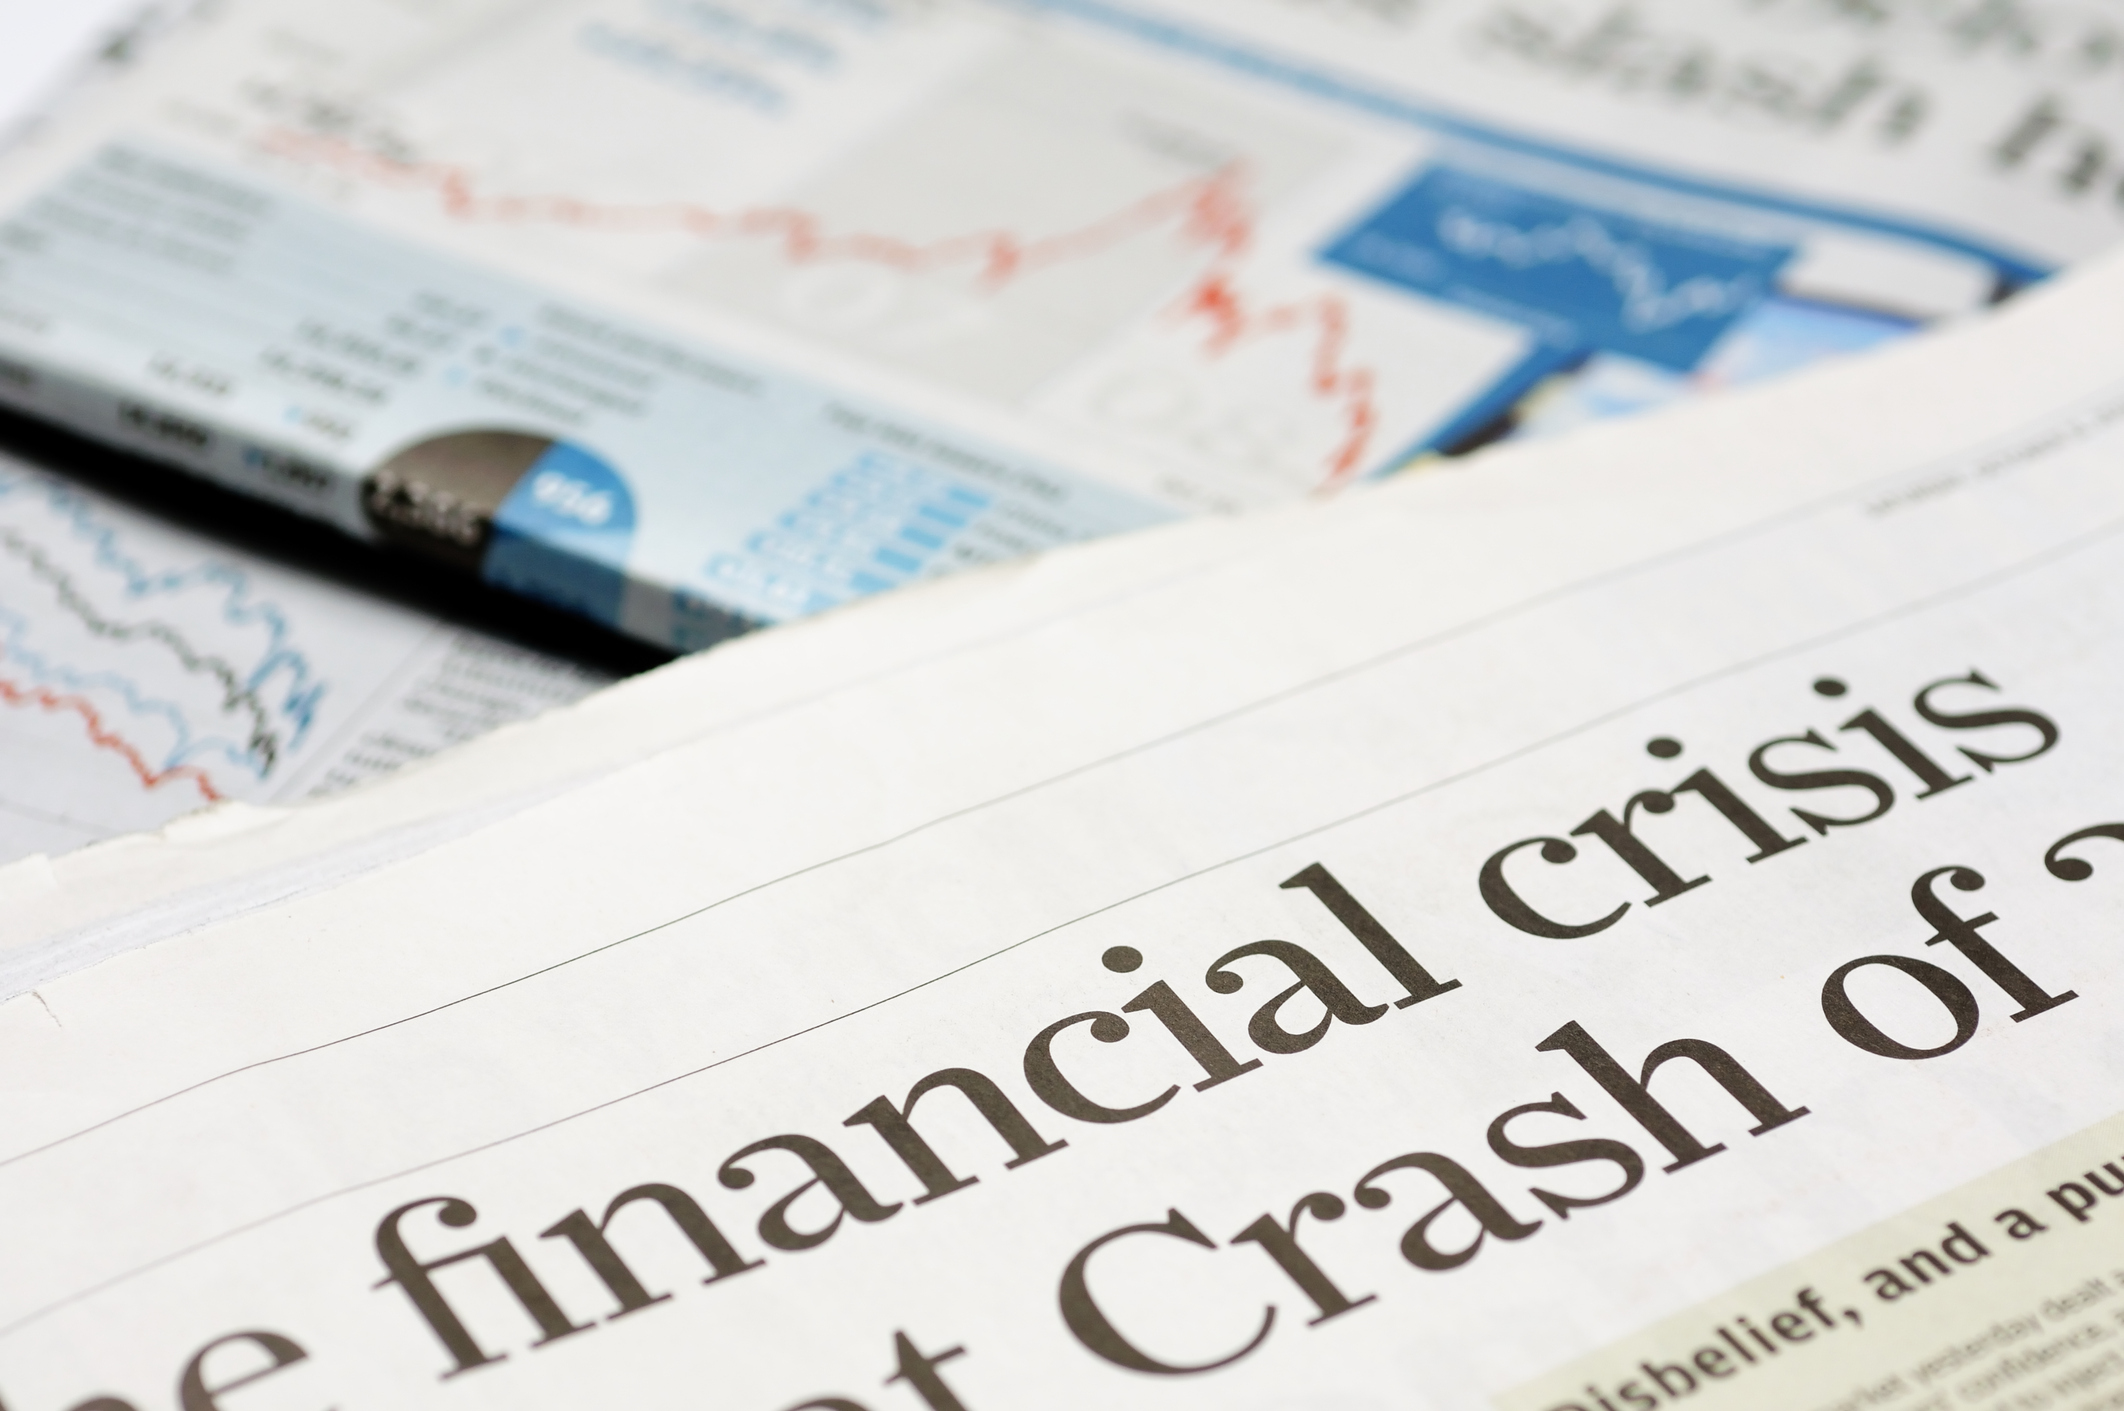 Partial view of newspaper with words reading "financial crisis" and "crash" in the headline